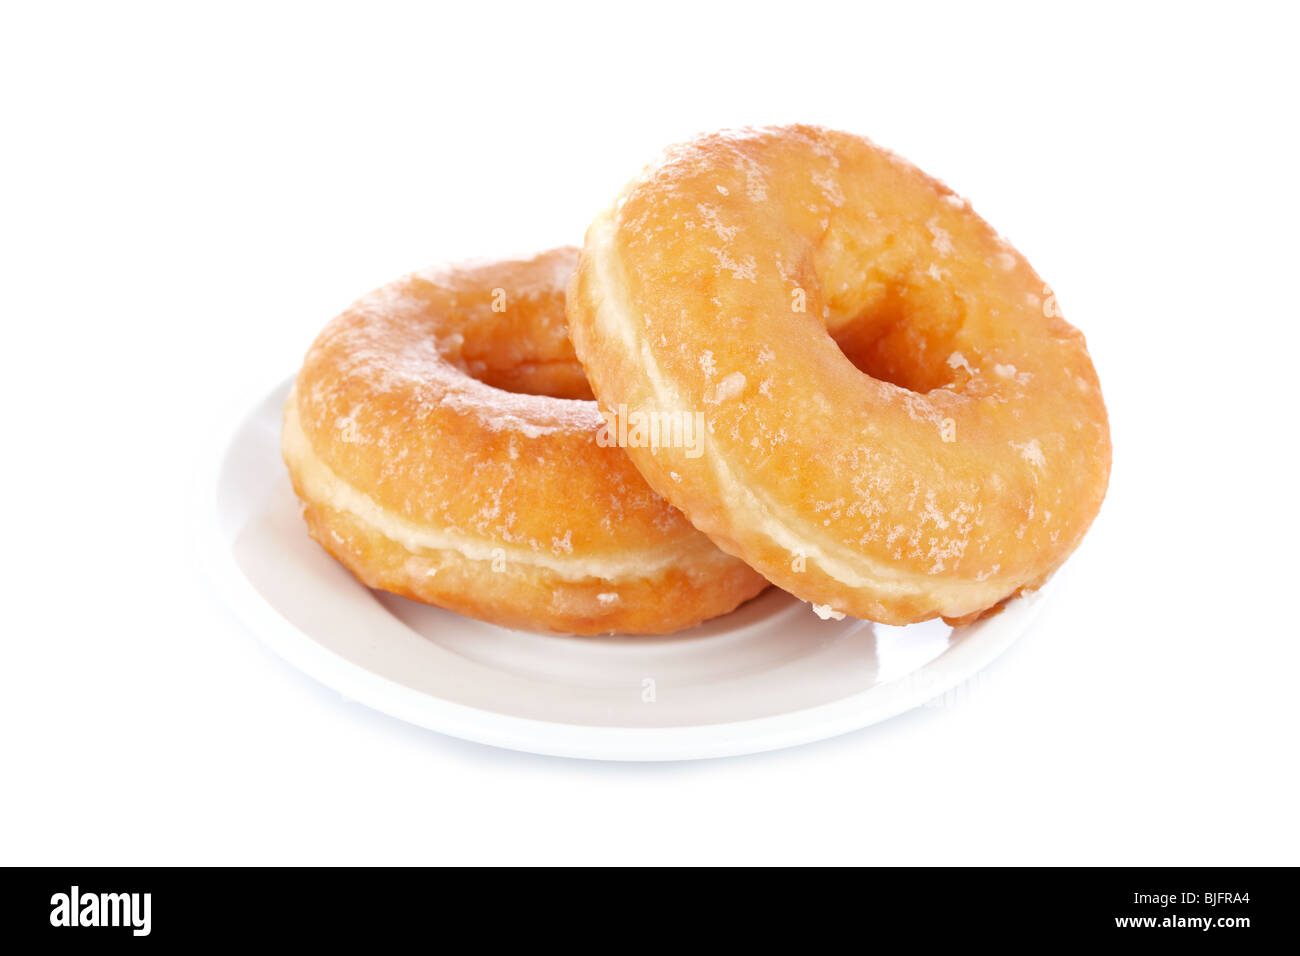 Two delicious donuts on a dish reflected on white background with shallow depth of field Stock Photo